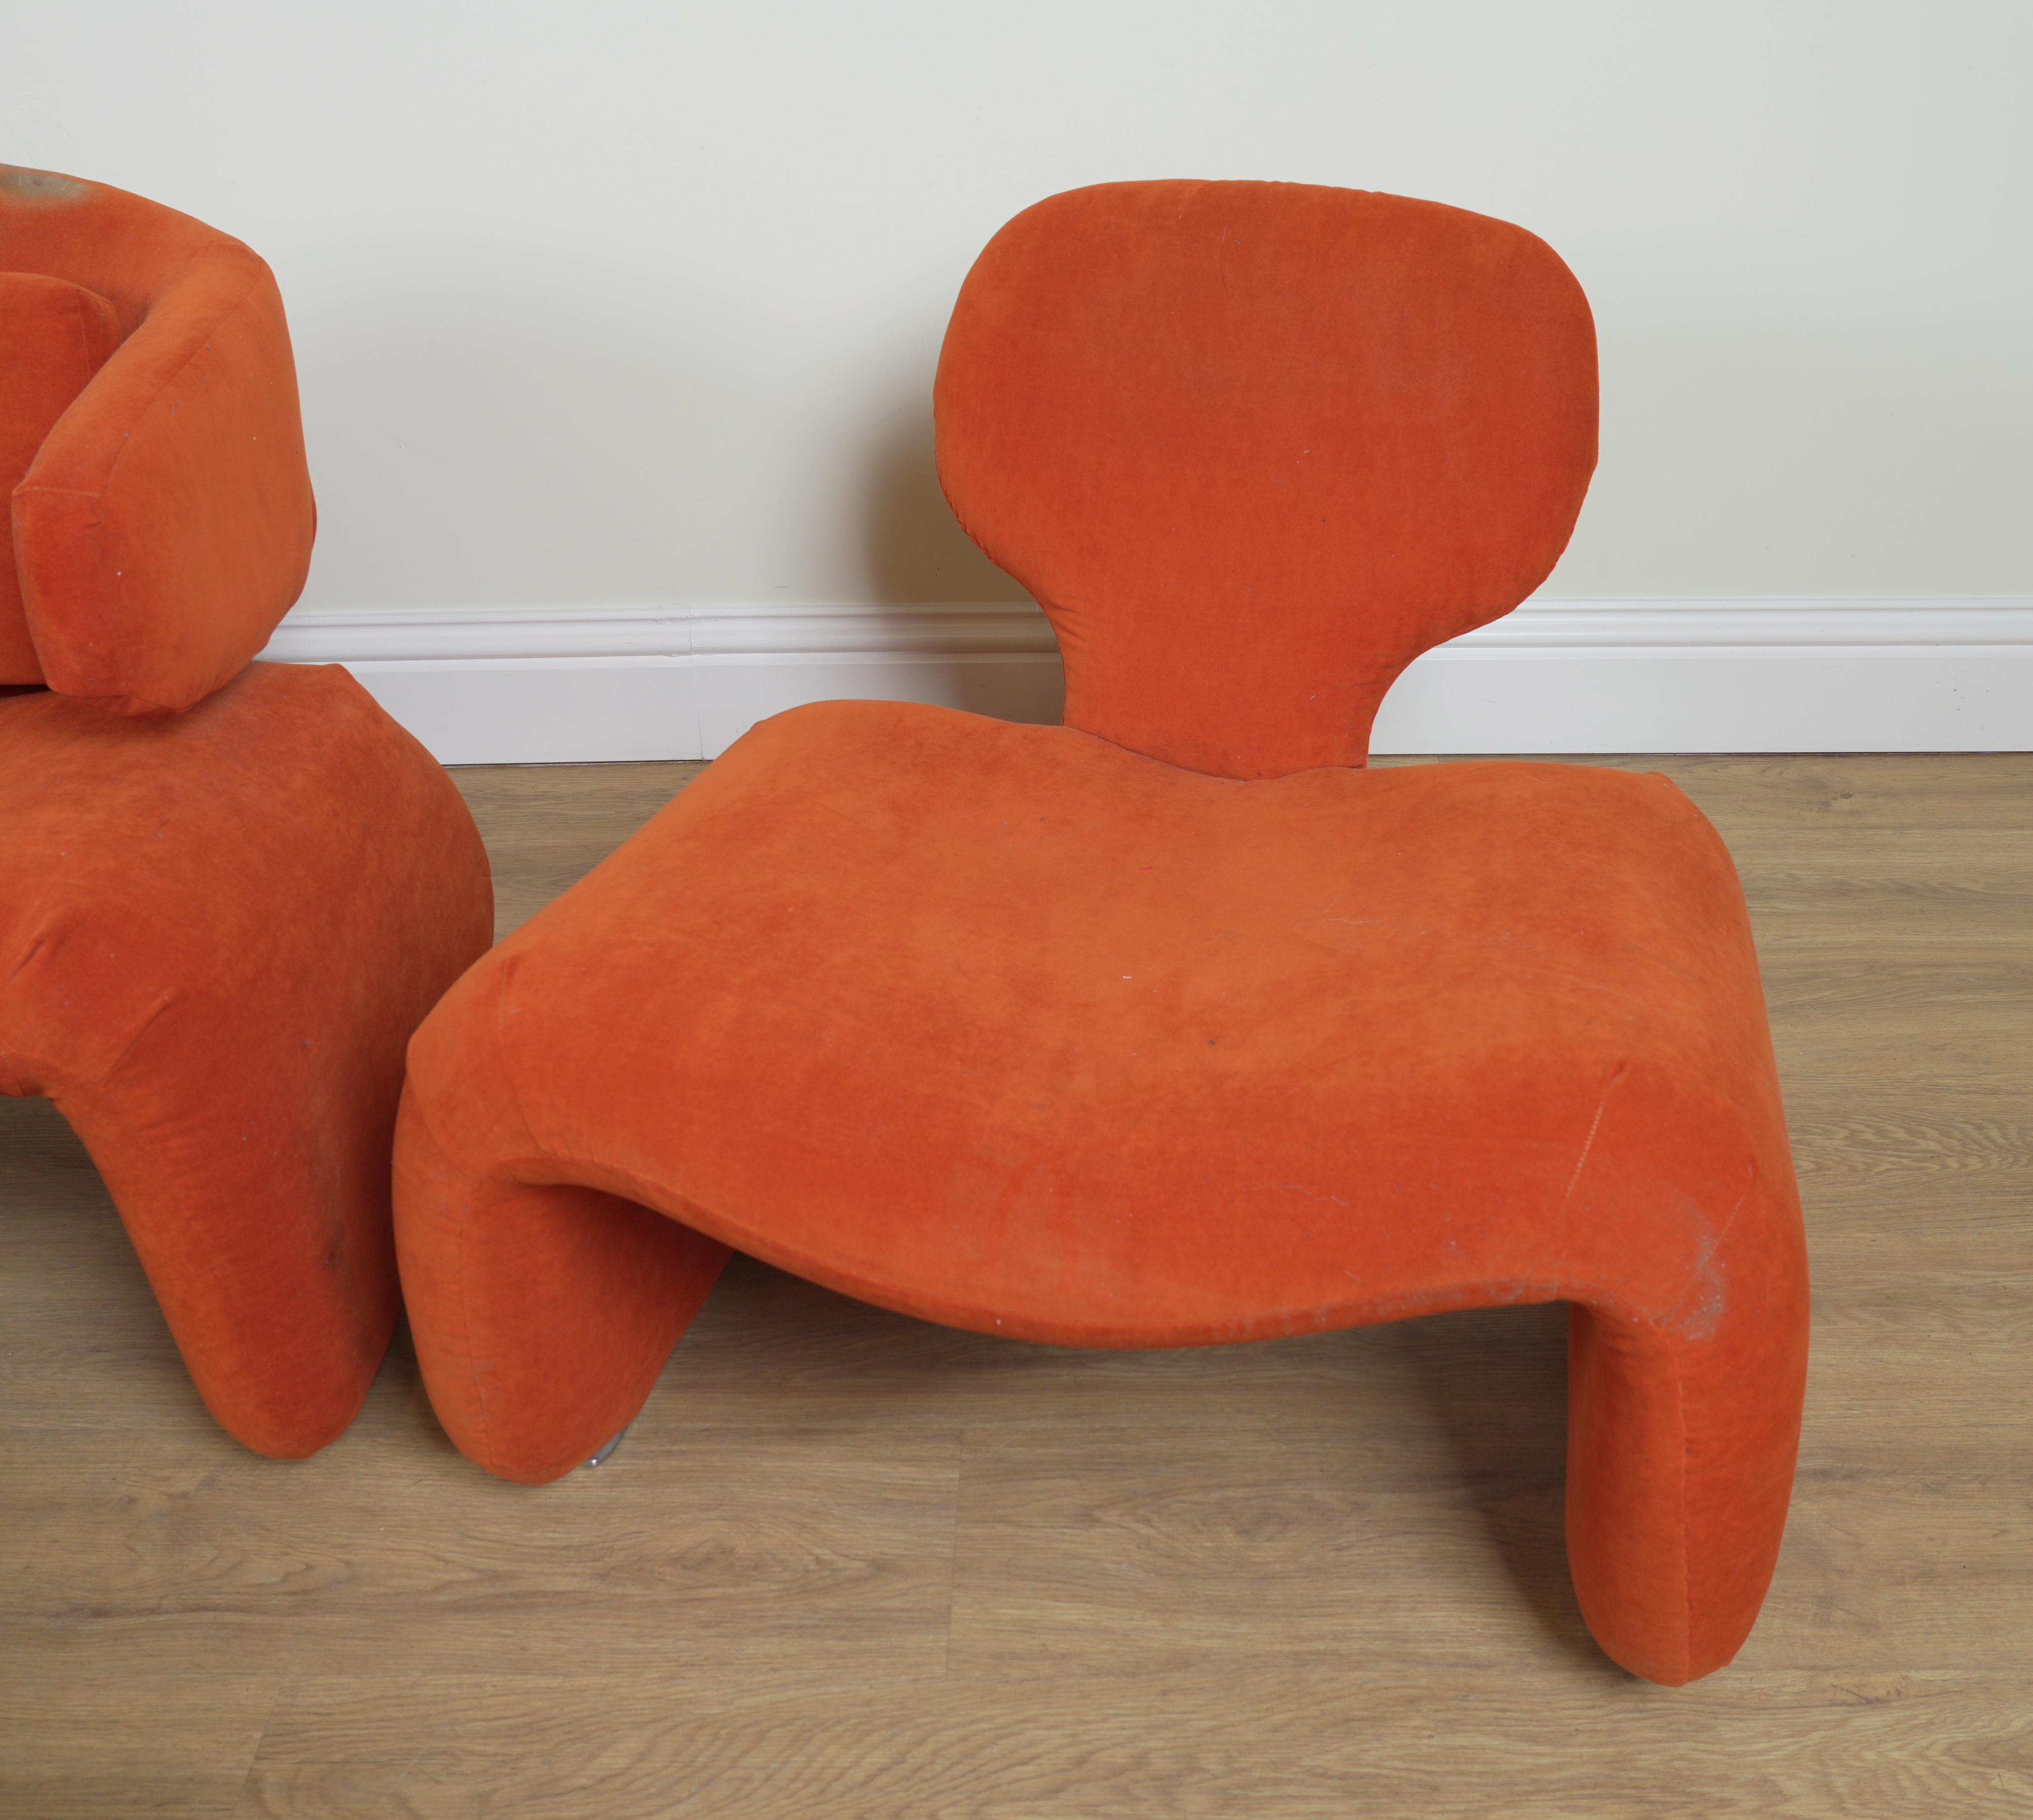 PROBABLY OLIVIER MOURGUE; AN ORANGE UPHOLSTERED SOFA AND CHAIRS (5) - Image 11 of 11